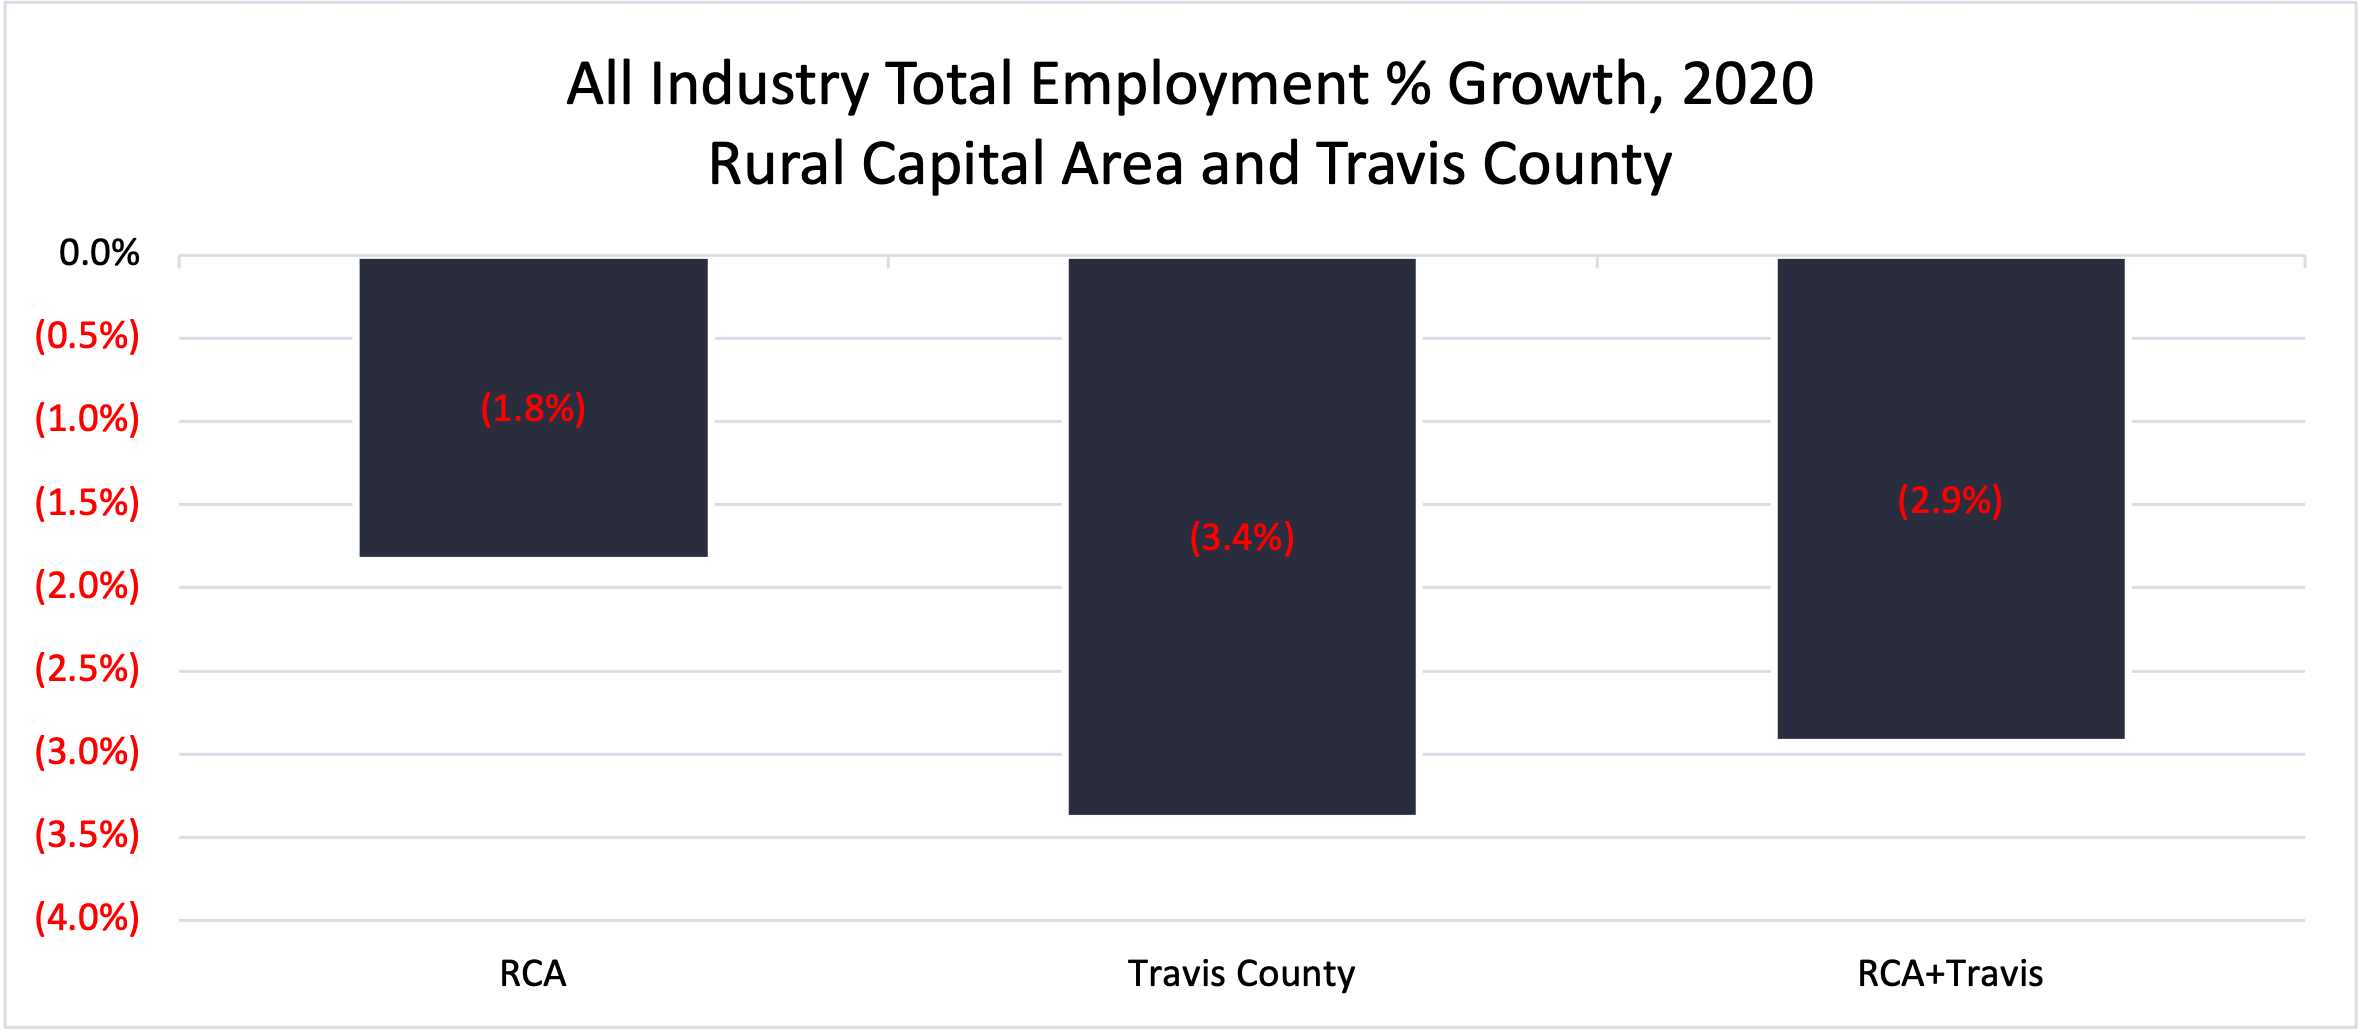 Rural Capital Area Total Employment Growth 2019 to 2020